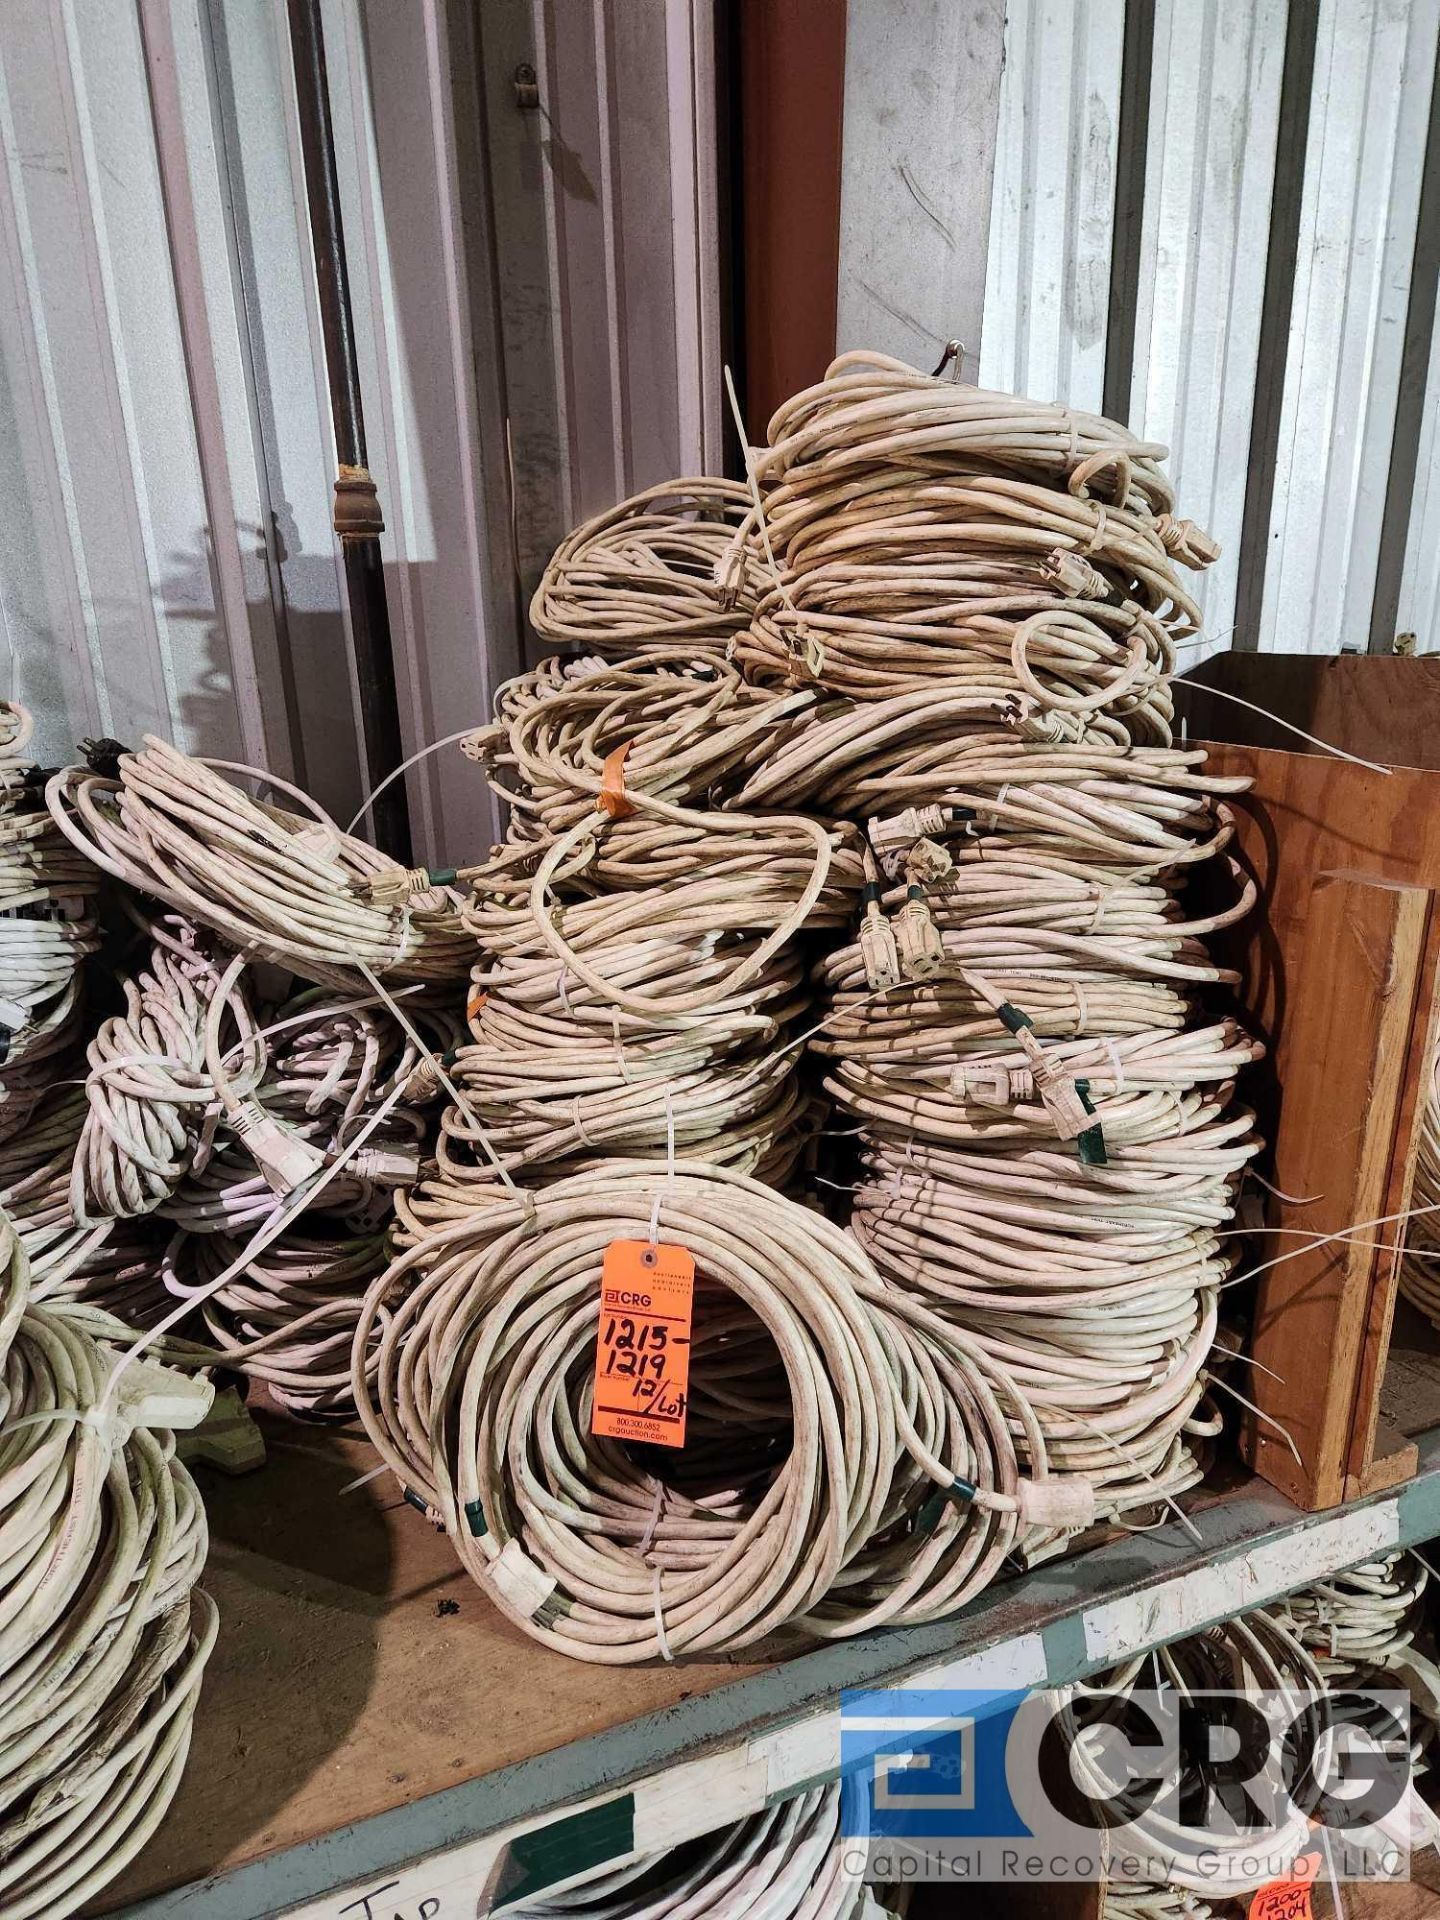 Lot of (12) 50' Long 12 Gauge White Extension Cords w/SINGLE Tap Outlet